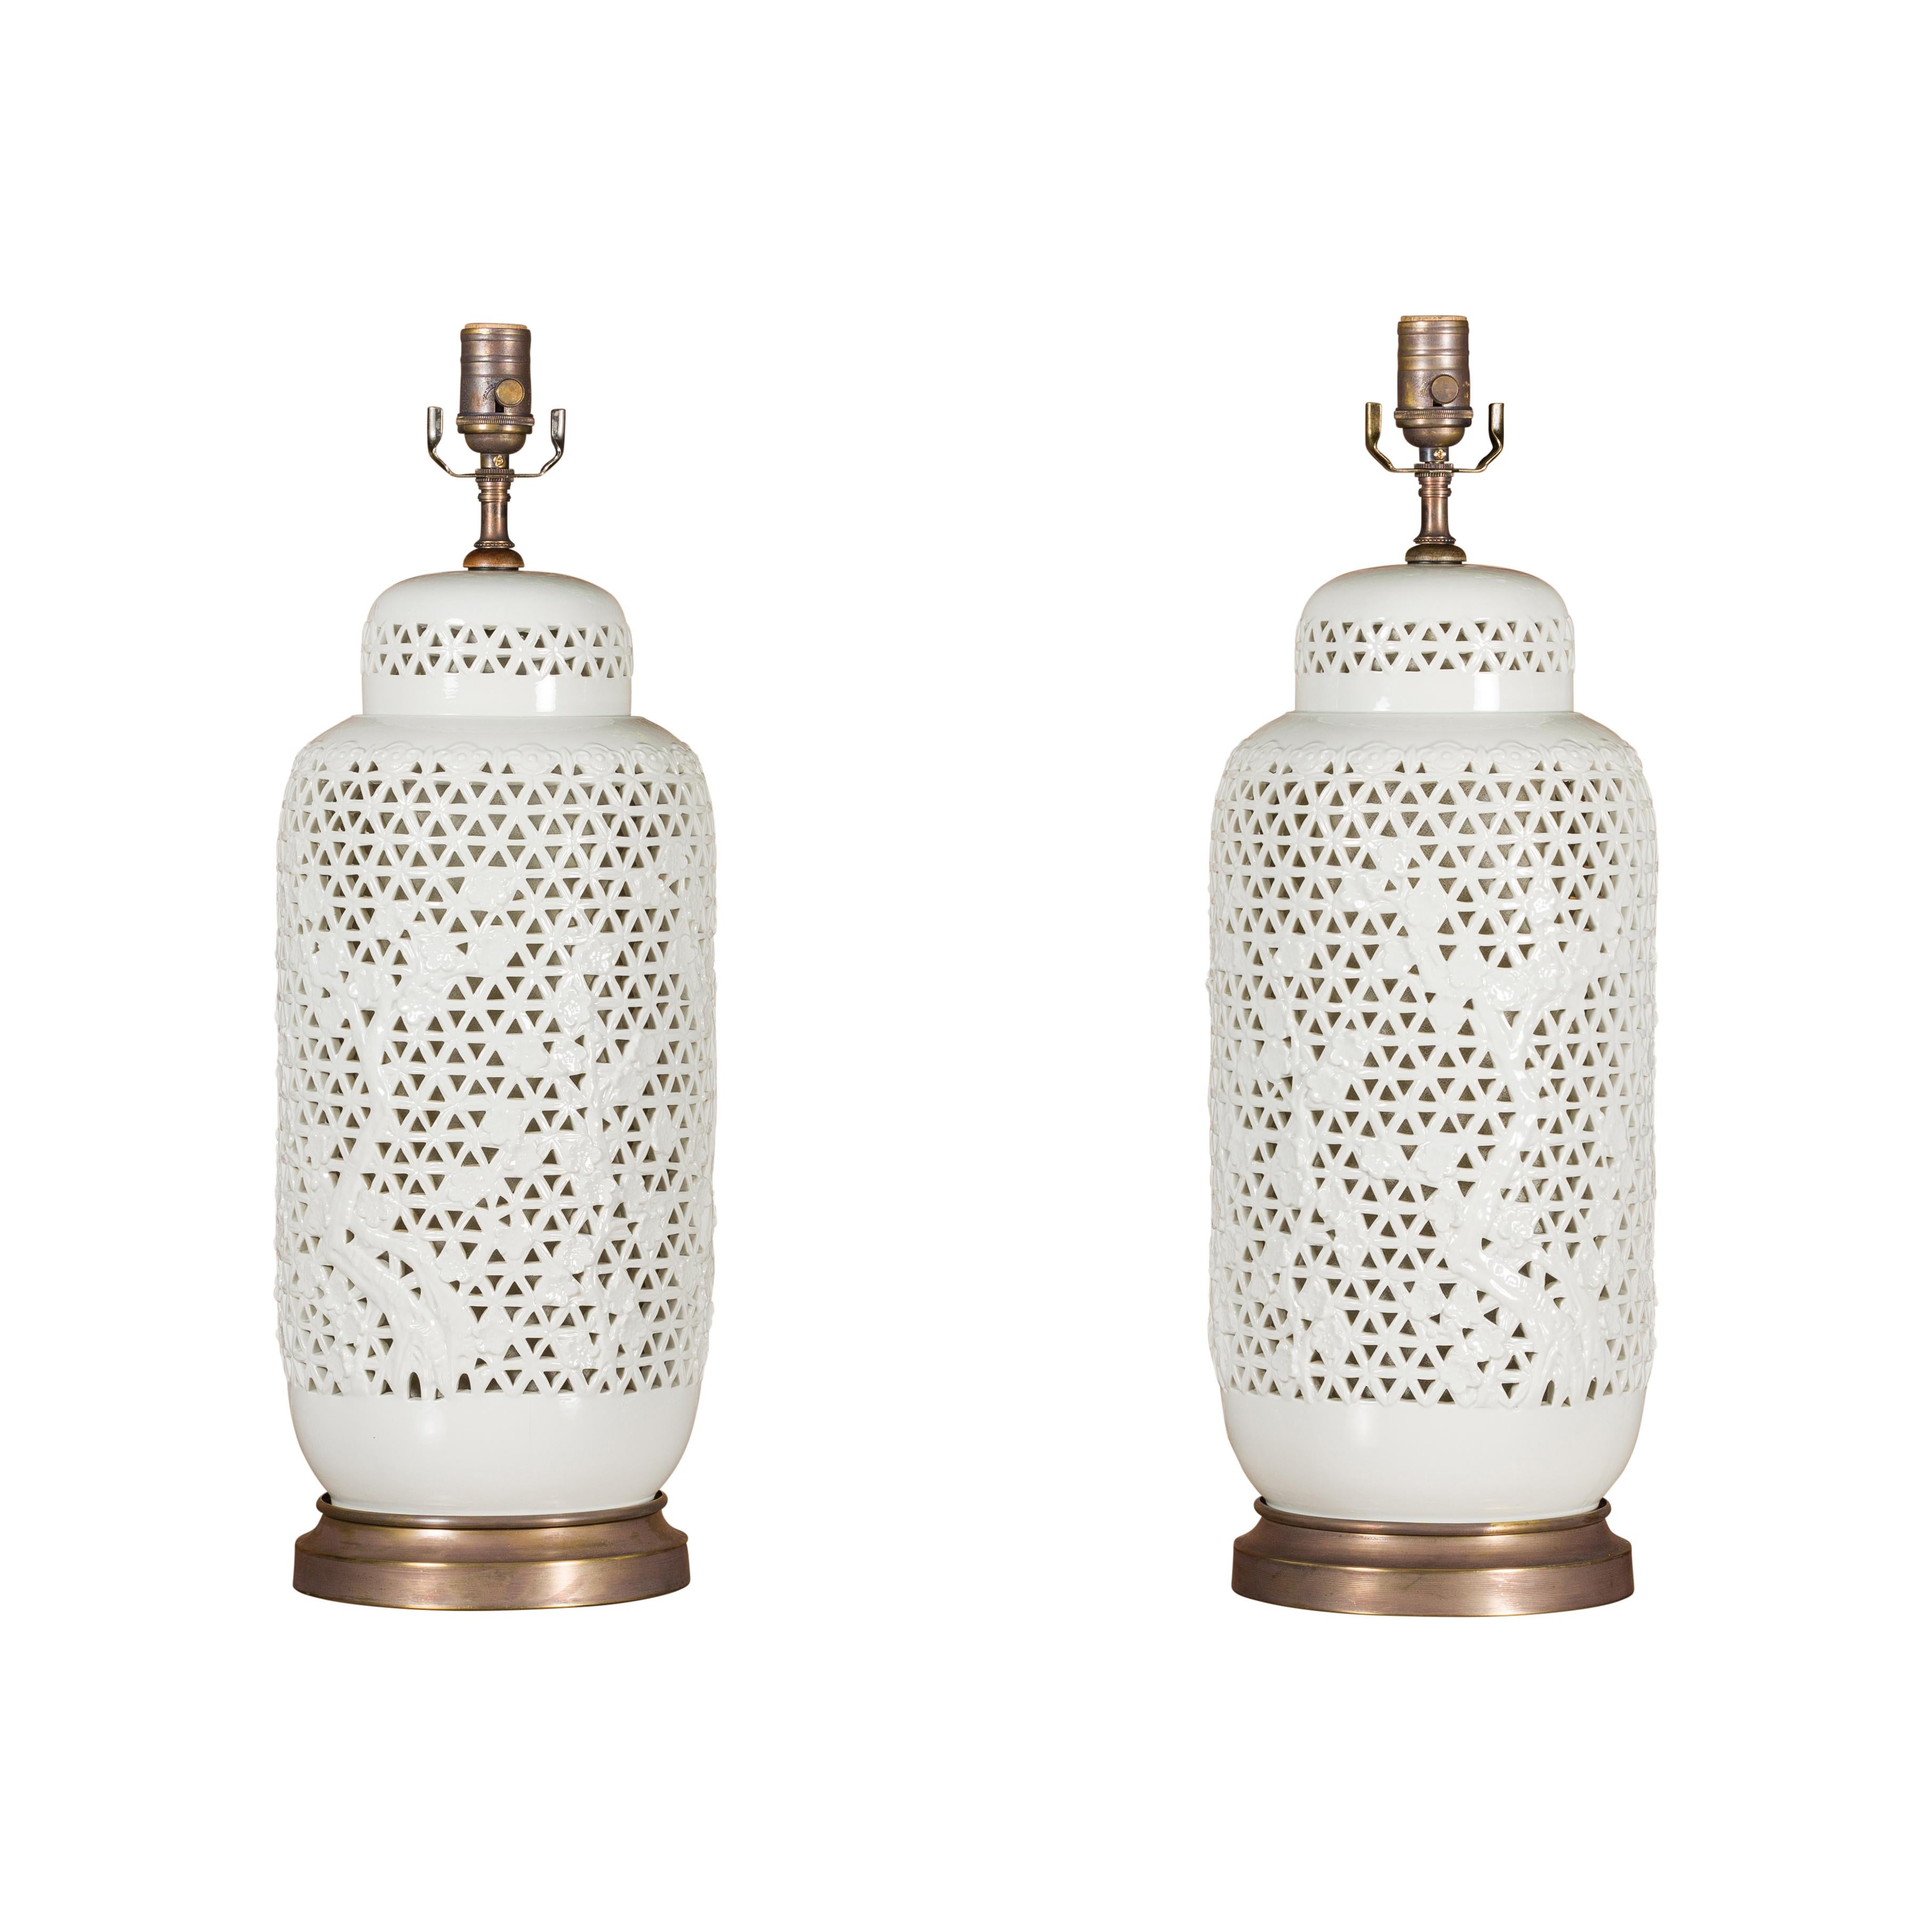 19th Century White Porcelain Vases with Floral Décor Made into Table Lamps, Pair For Sale 12